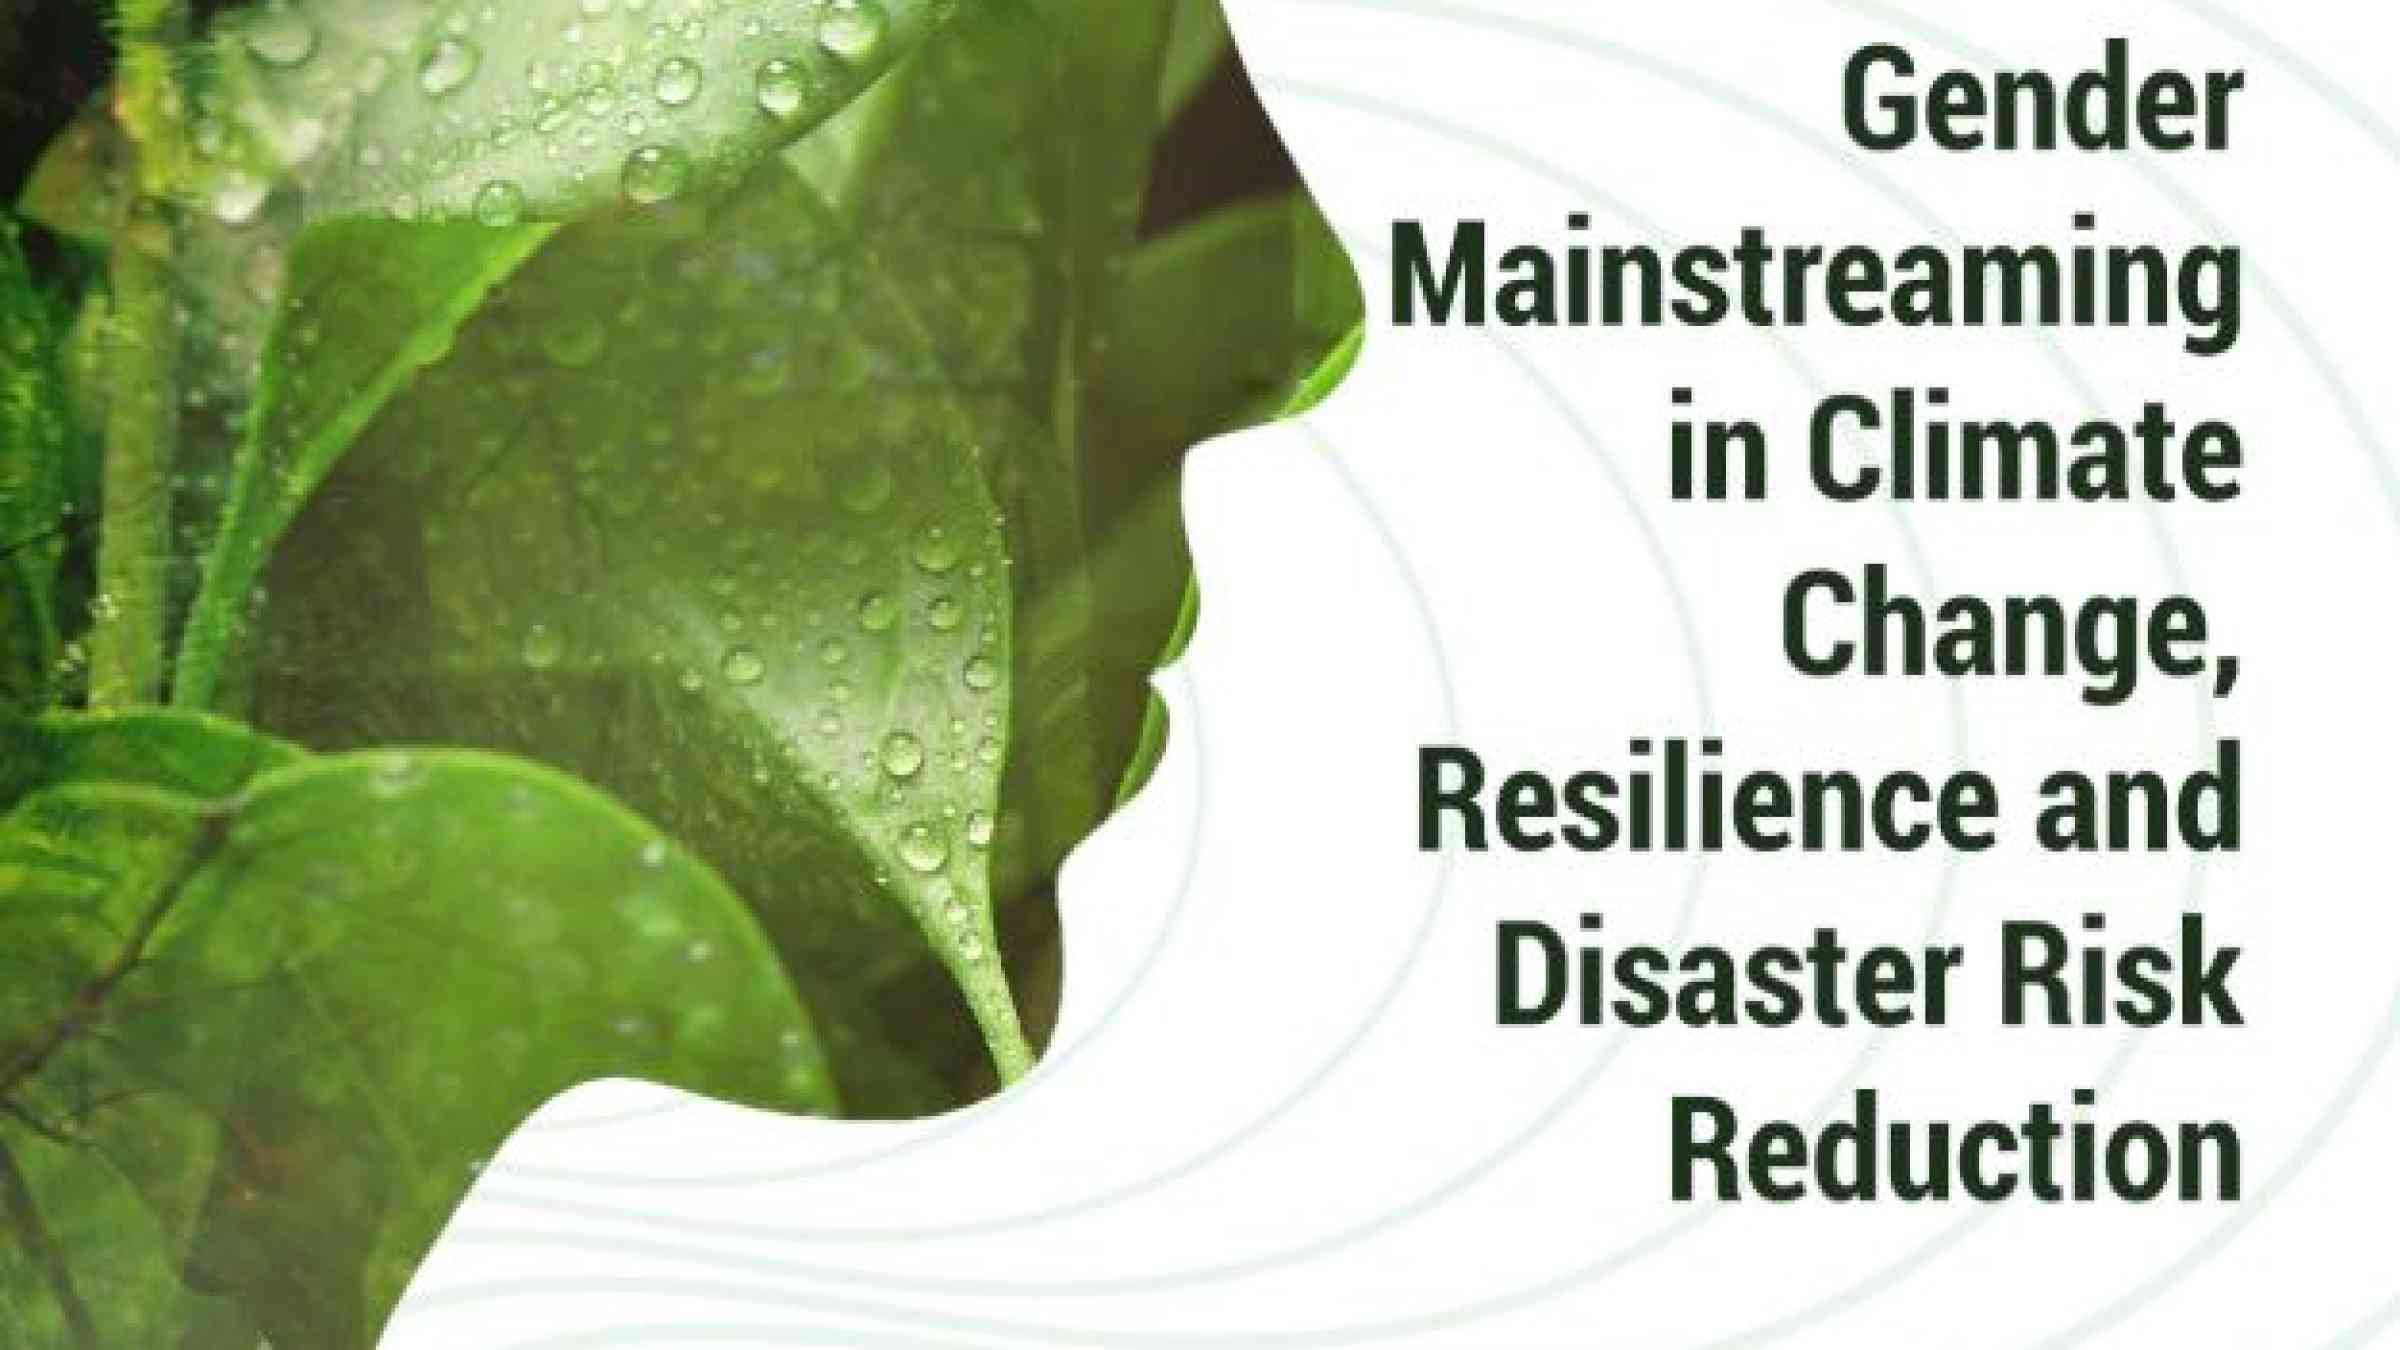 IBC Gender mainstreaming in climate change, resilience and DRR